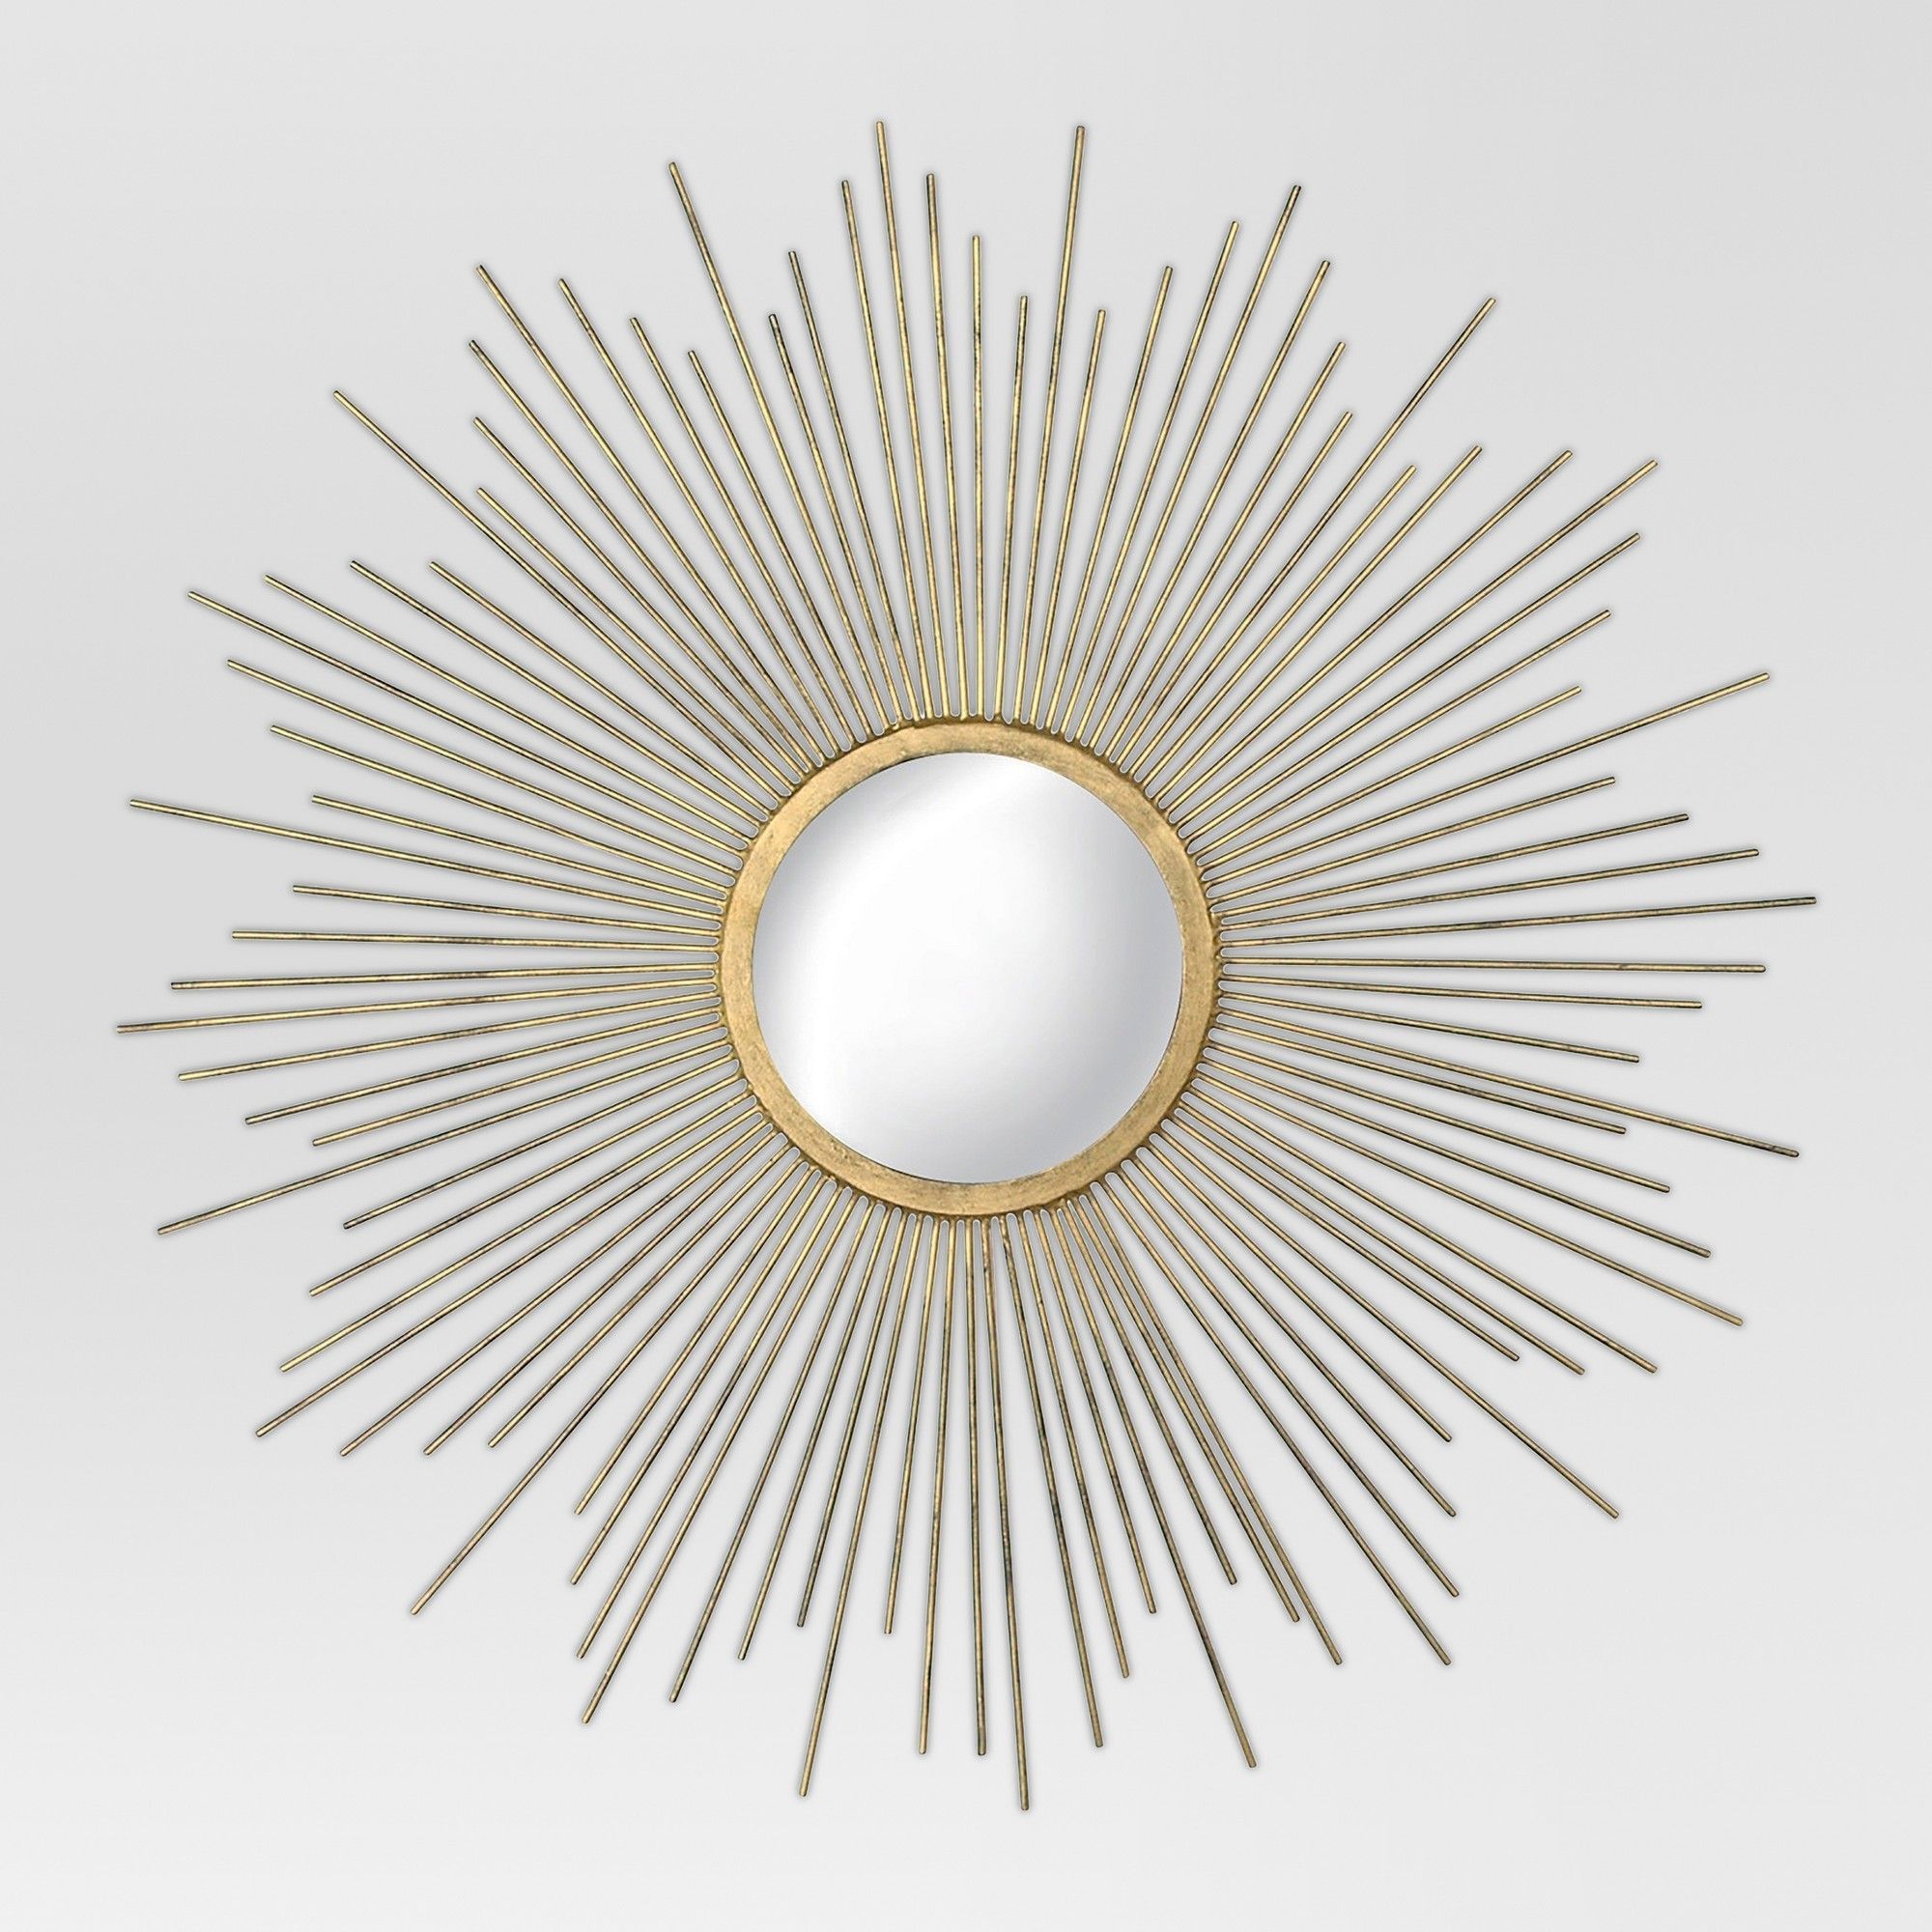 23" Sunburst Decorative Wall Mirror Metal Antique Gold – Mcs | Gold Intended For Brass Sunburst Wall Mirrors (View 15 of 15)